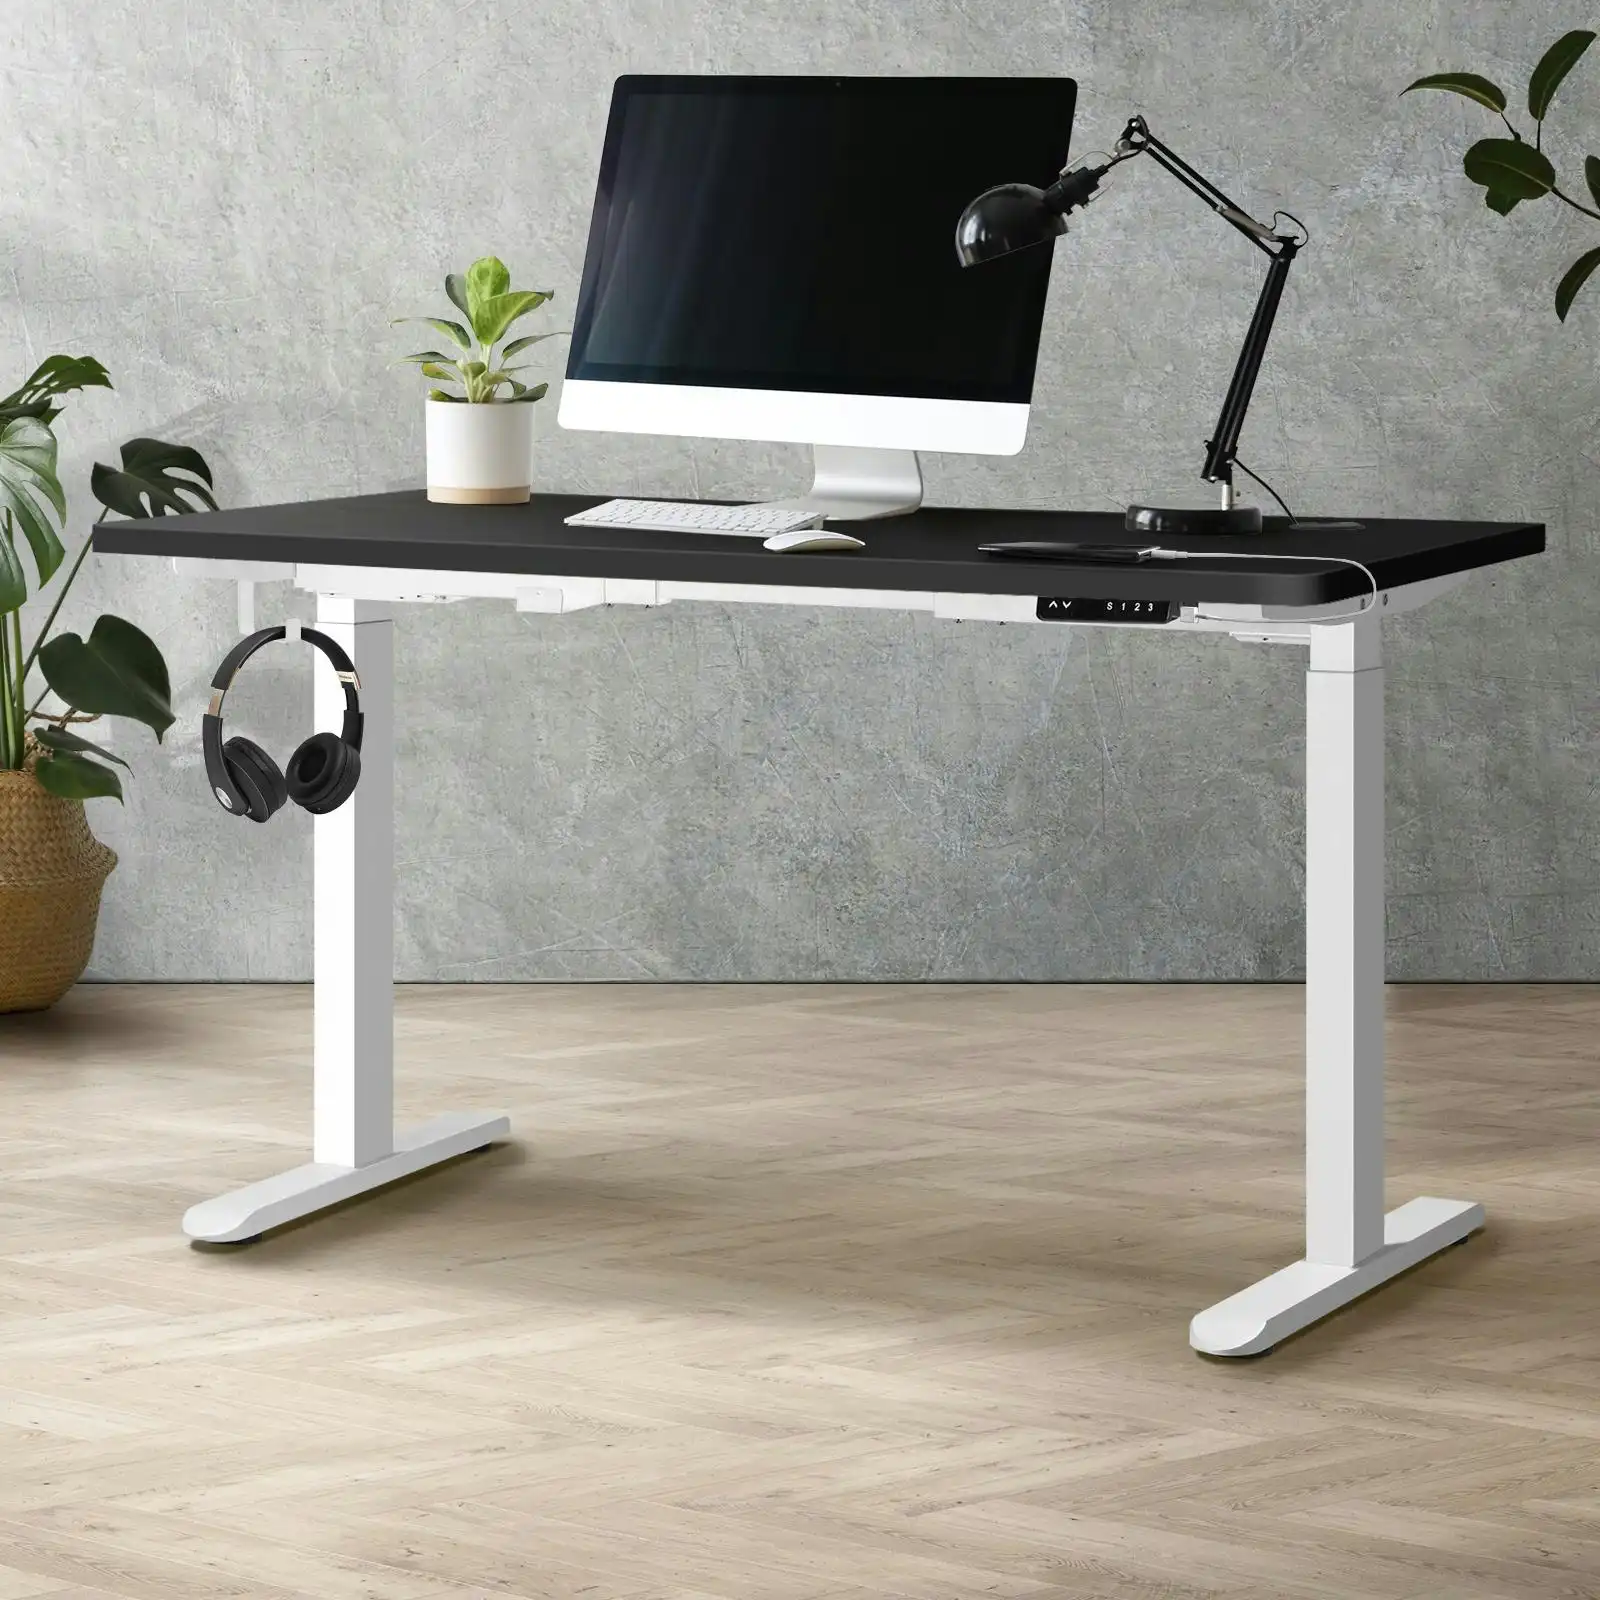 Oikiture 120cm Electric Standing Desk Dual Motor White Frame Black Desktop With USB&Type C Port